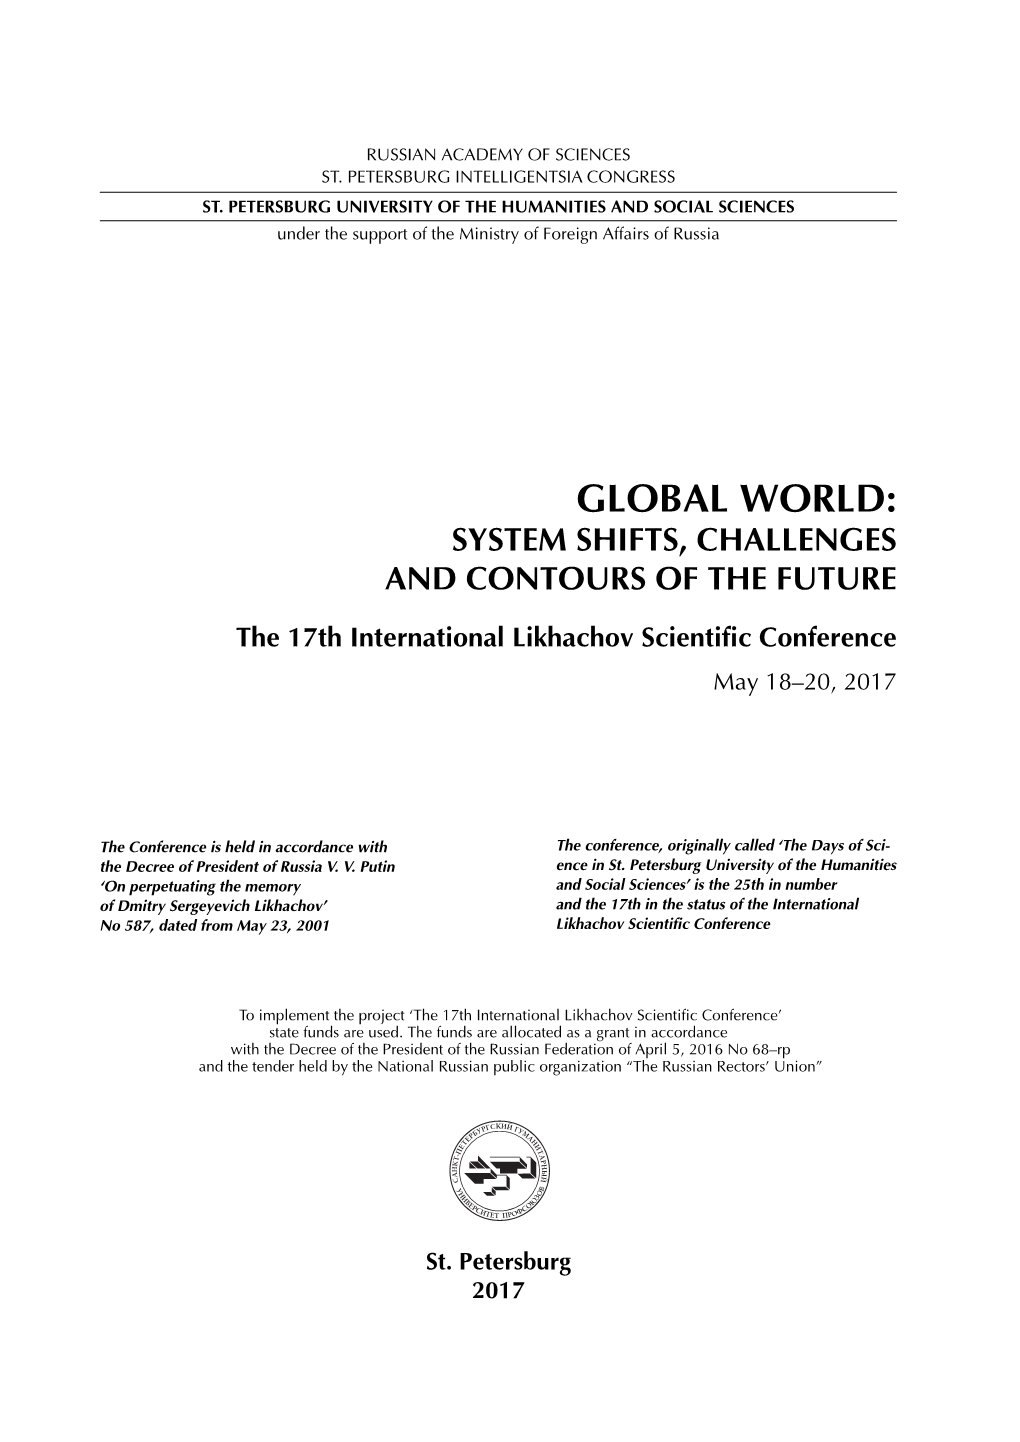 Global World: System Shifts, Challenges and Contours of the Future